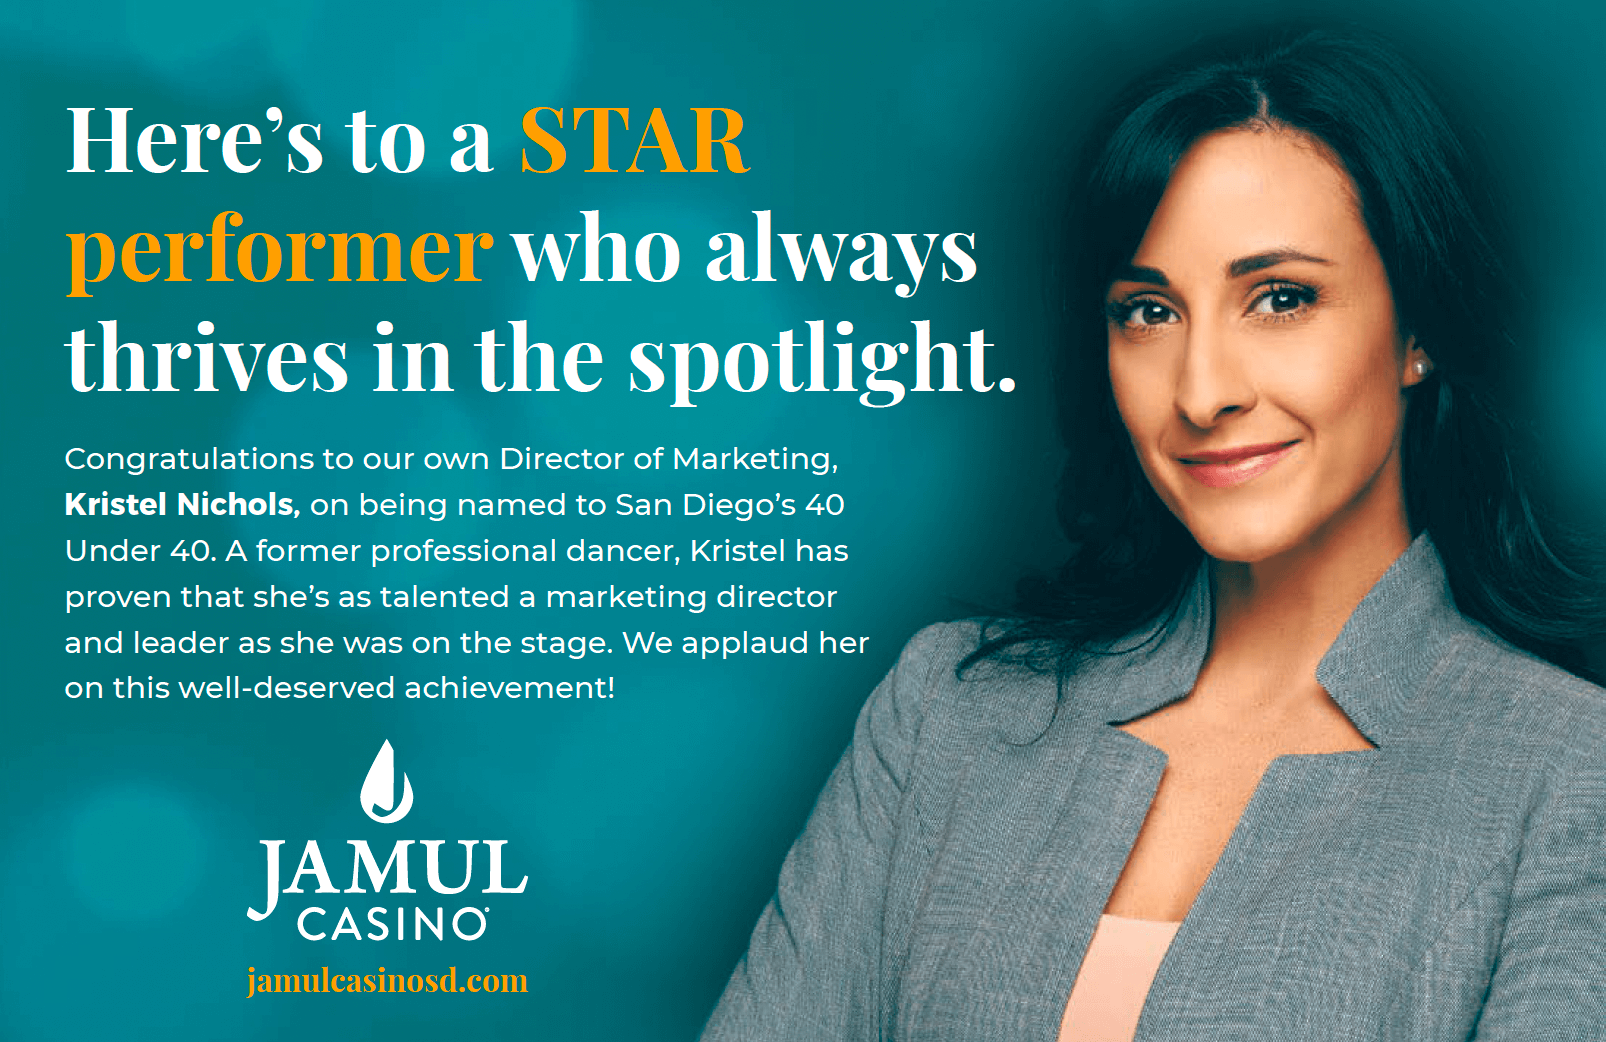 Kristel Nichols, Jamul Casino's Director of Marketing, celebrates being named to San Diego's 40 Under 40, exemplifying leadership and talent.